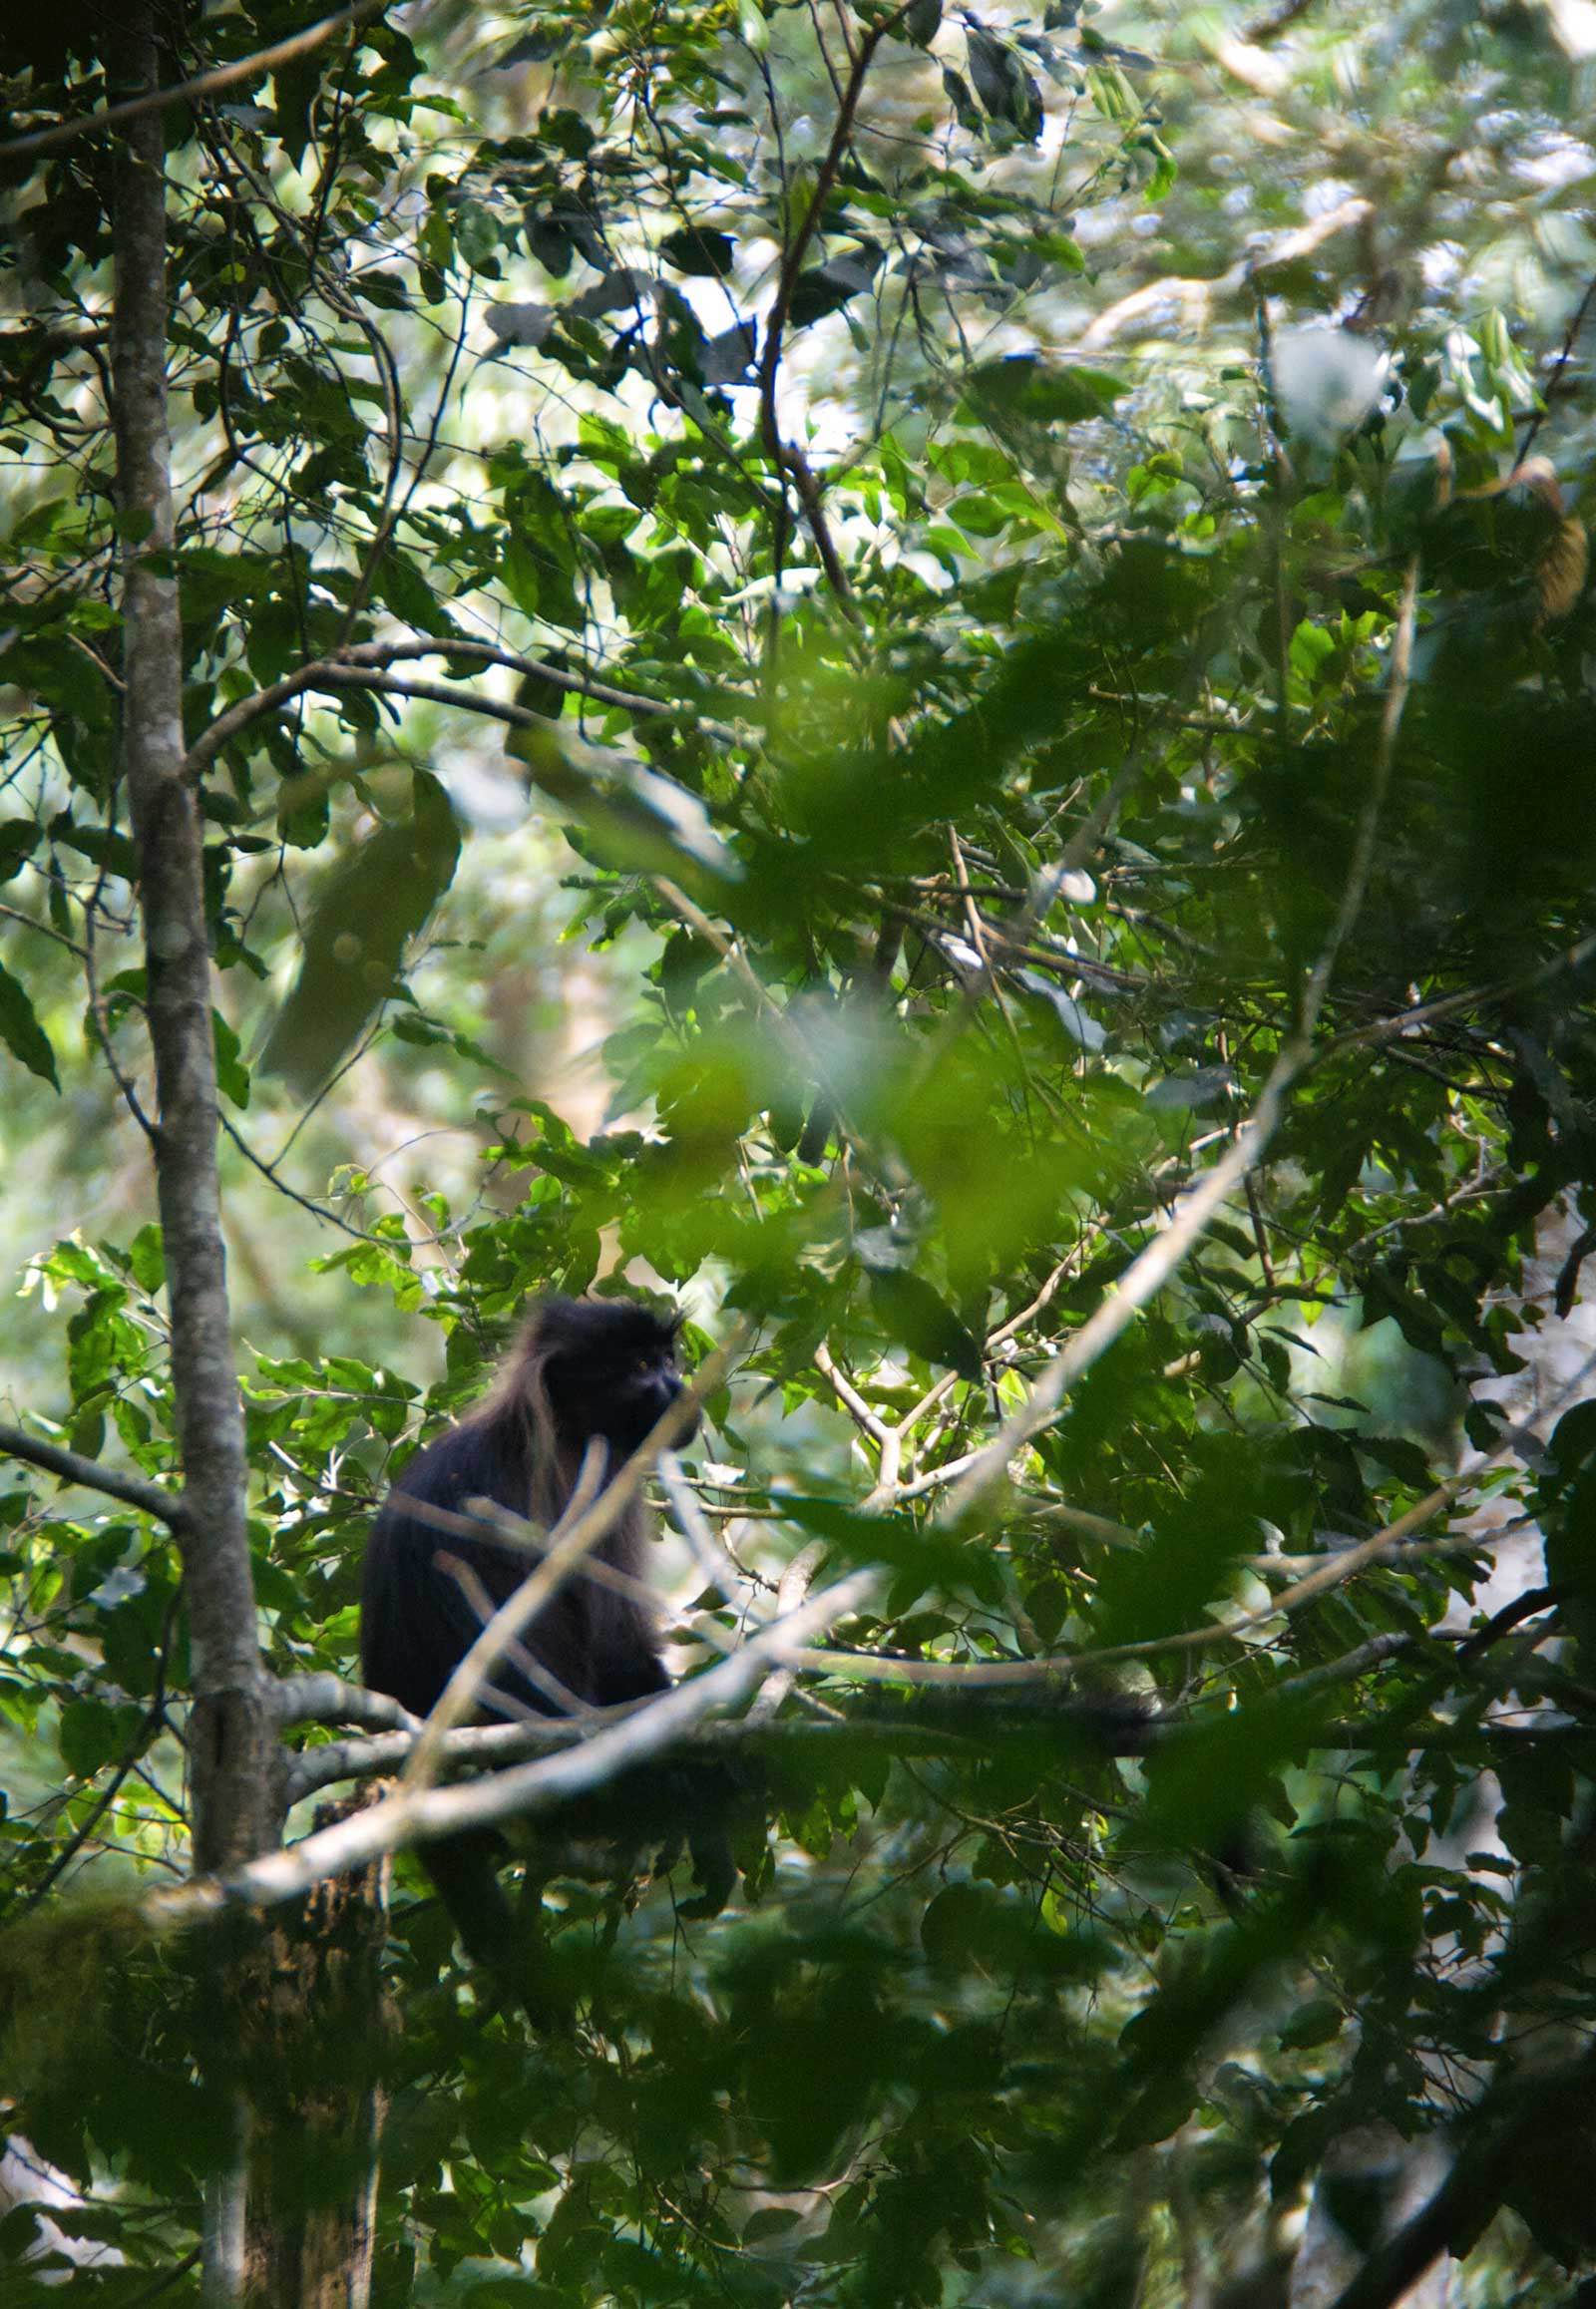 A grey-cheeked mangabey spotted in Kibale Forest, sharing the environment with chimpanzees